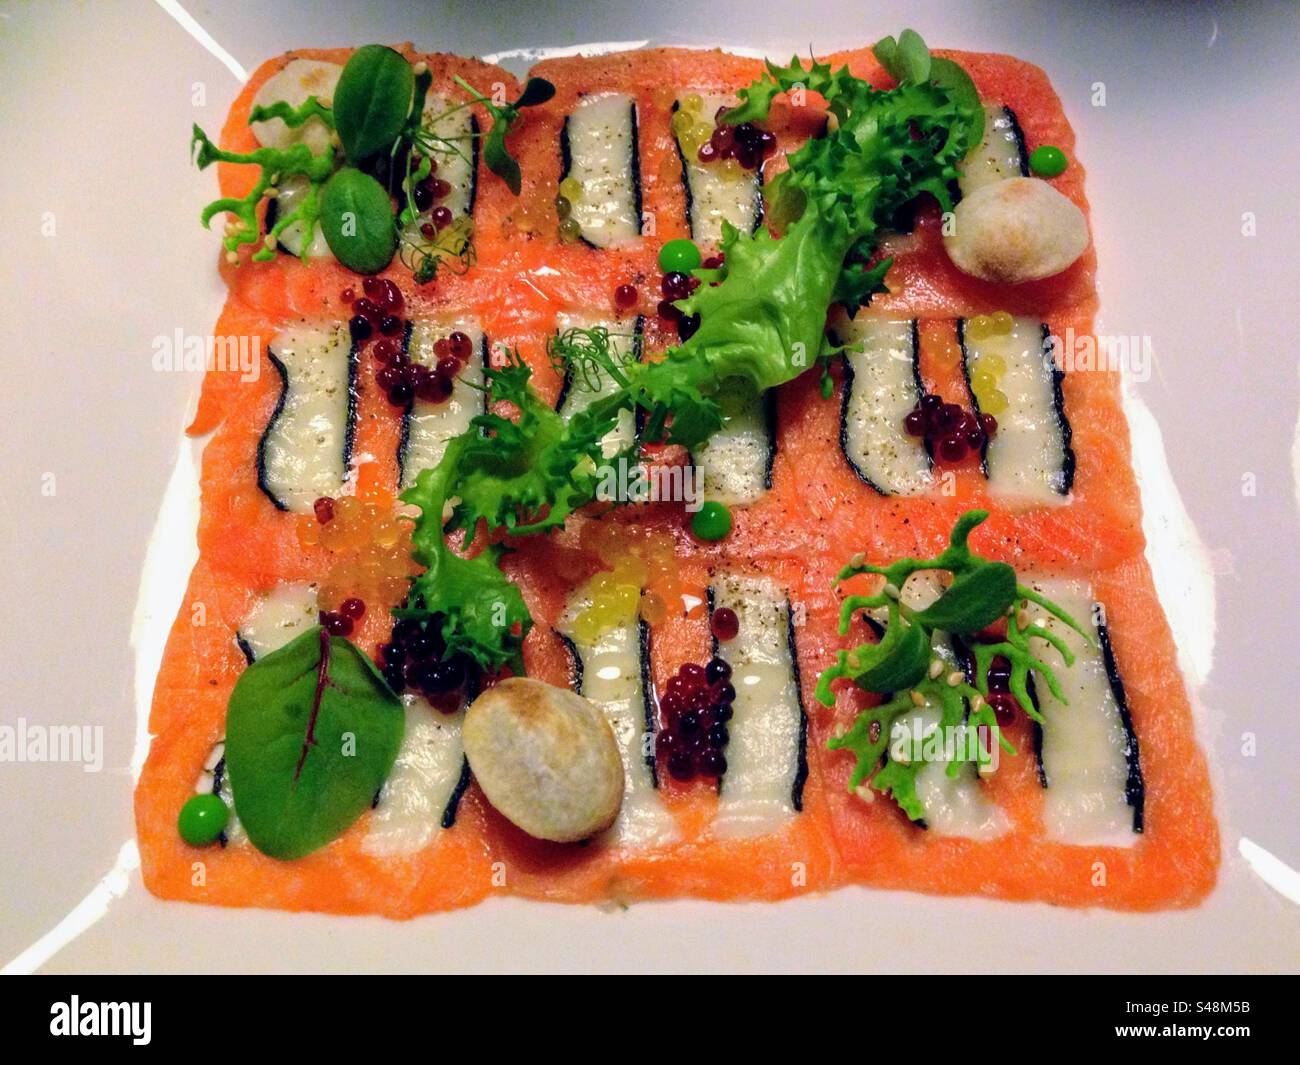 Delicious gourmet geometric shapes seafood starter appetiser with salmon, eel fish, caviar, caviart, potato and salad leaves set on the shiny square plate Stock Photo